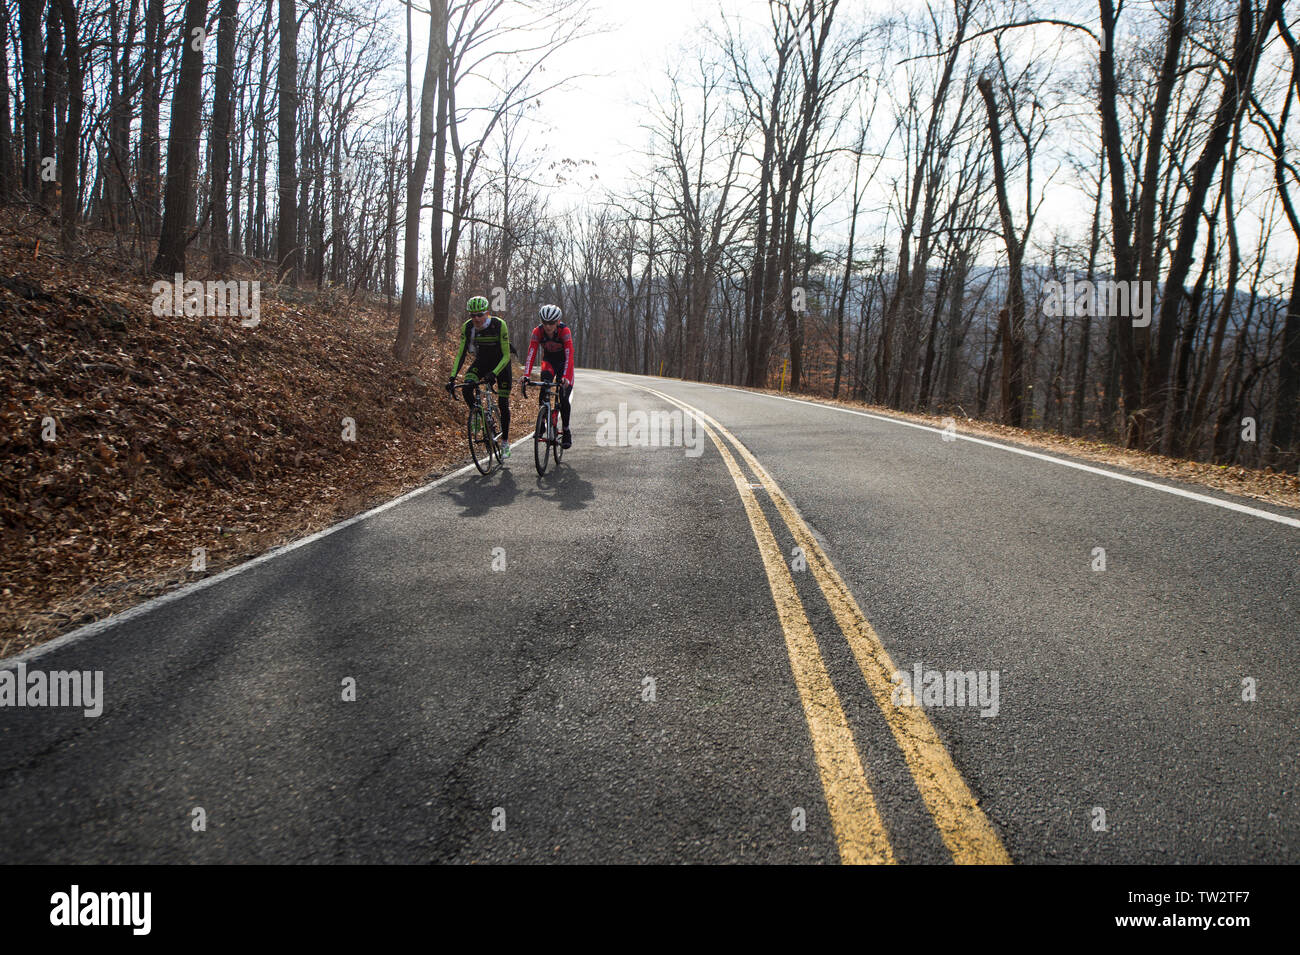 UNITED STATES - December 8, 2015: Pro cyclist Justin Mauch and Joe Dombrowski ride across Mt. Weather in the Blue Ridge Mountains of Virginia near Par Stock Photo